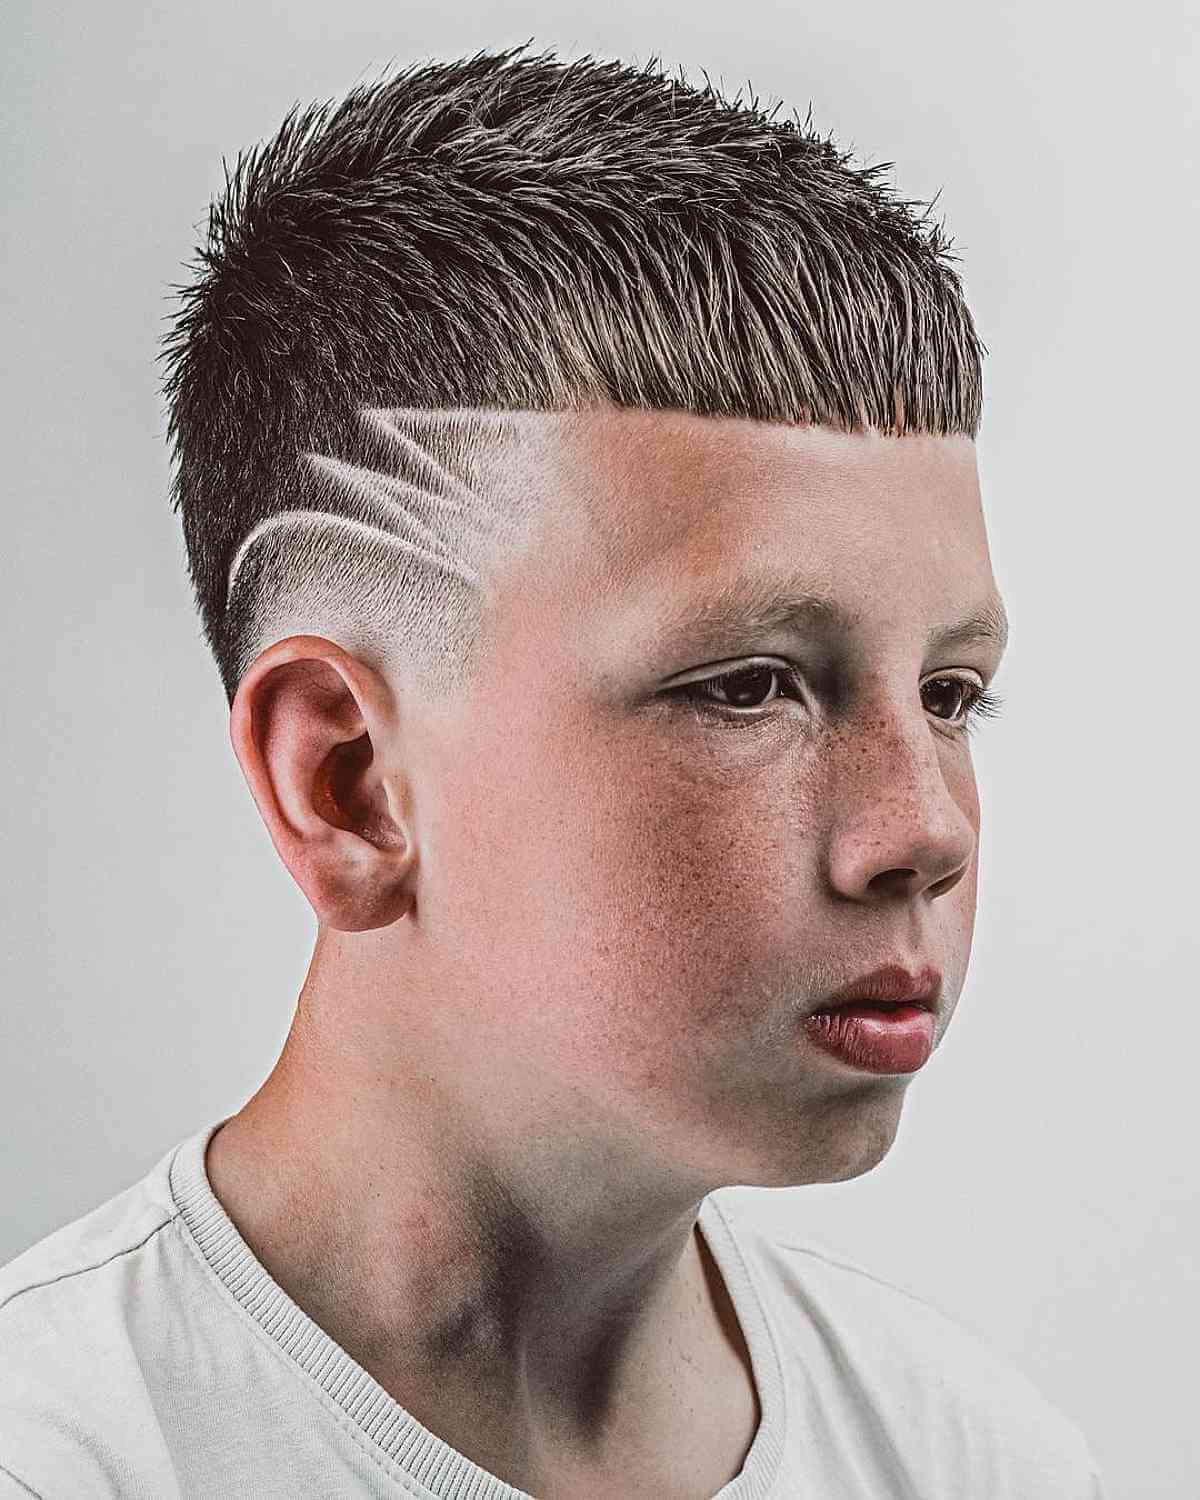 Skin Fade with Fringe for Little Boys